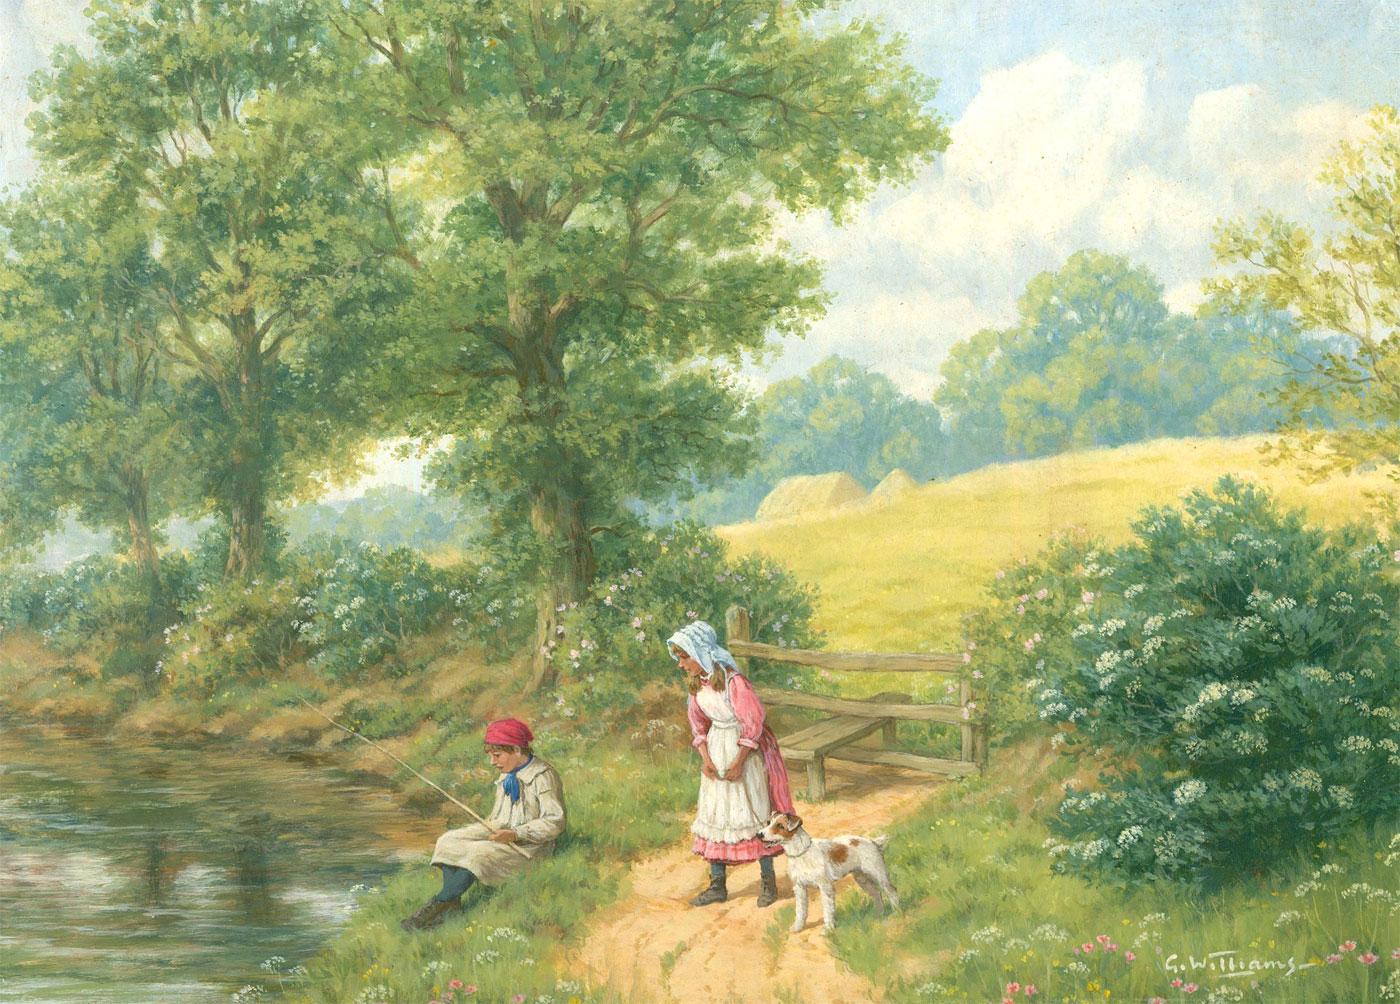 A charming scene depicting a young girl and boy at the river's edge. The boy casts a fishing pole into the river and the girl and her faithful terrier watch. Signed to the lower right. Biographical information on the artist attached to the reverse.